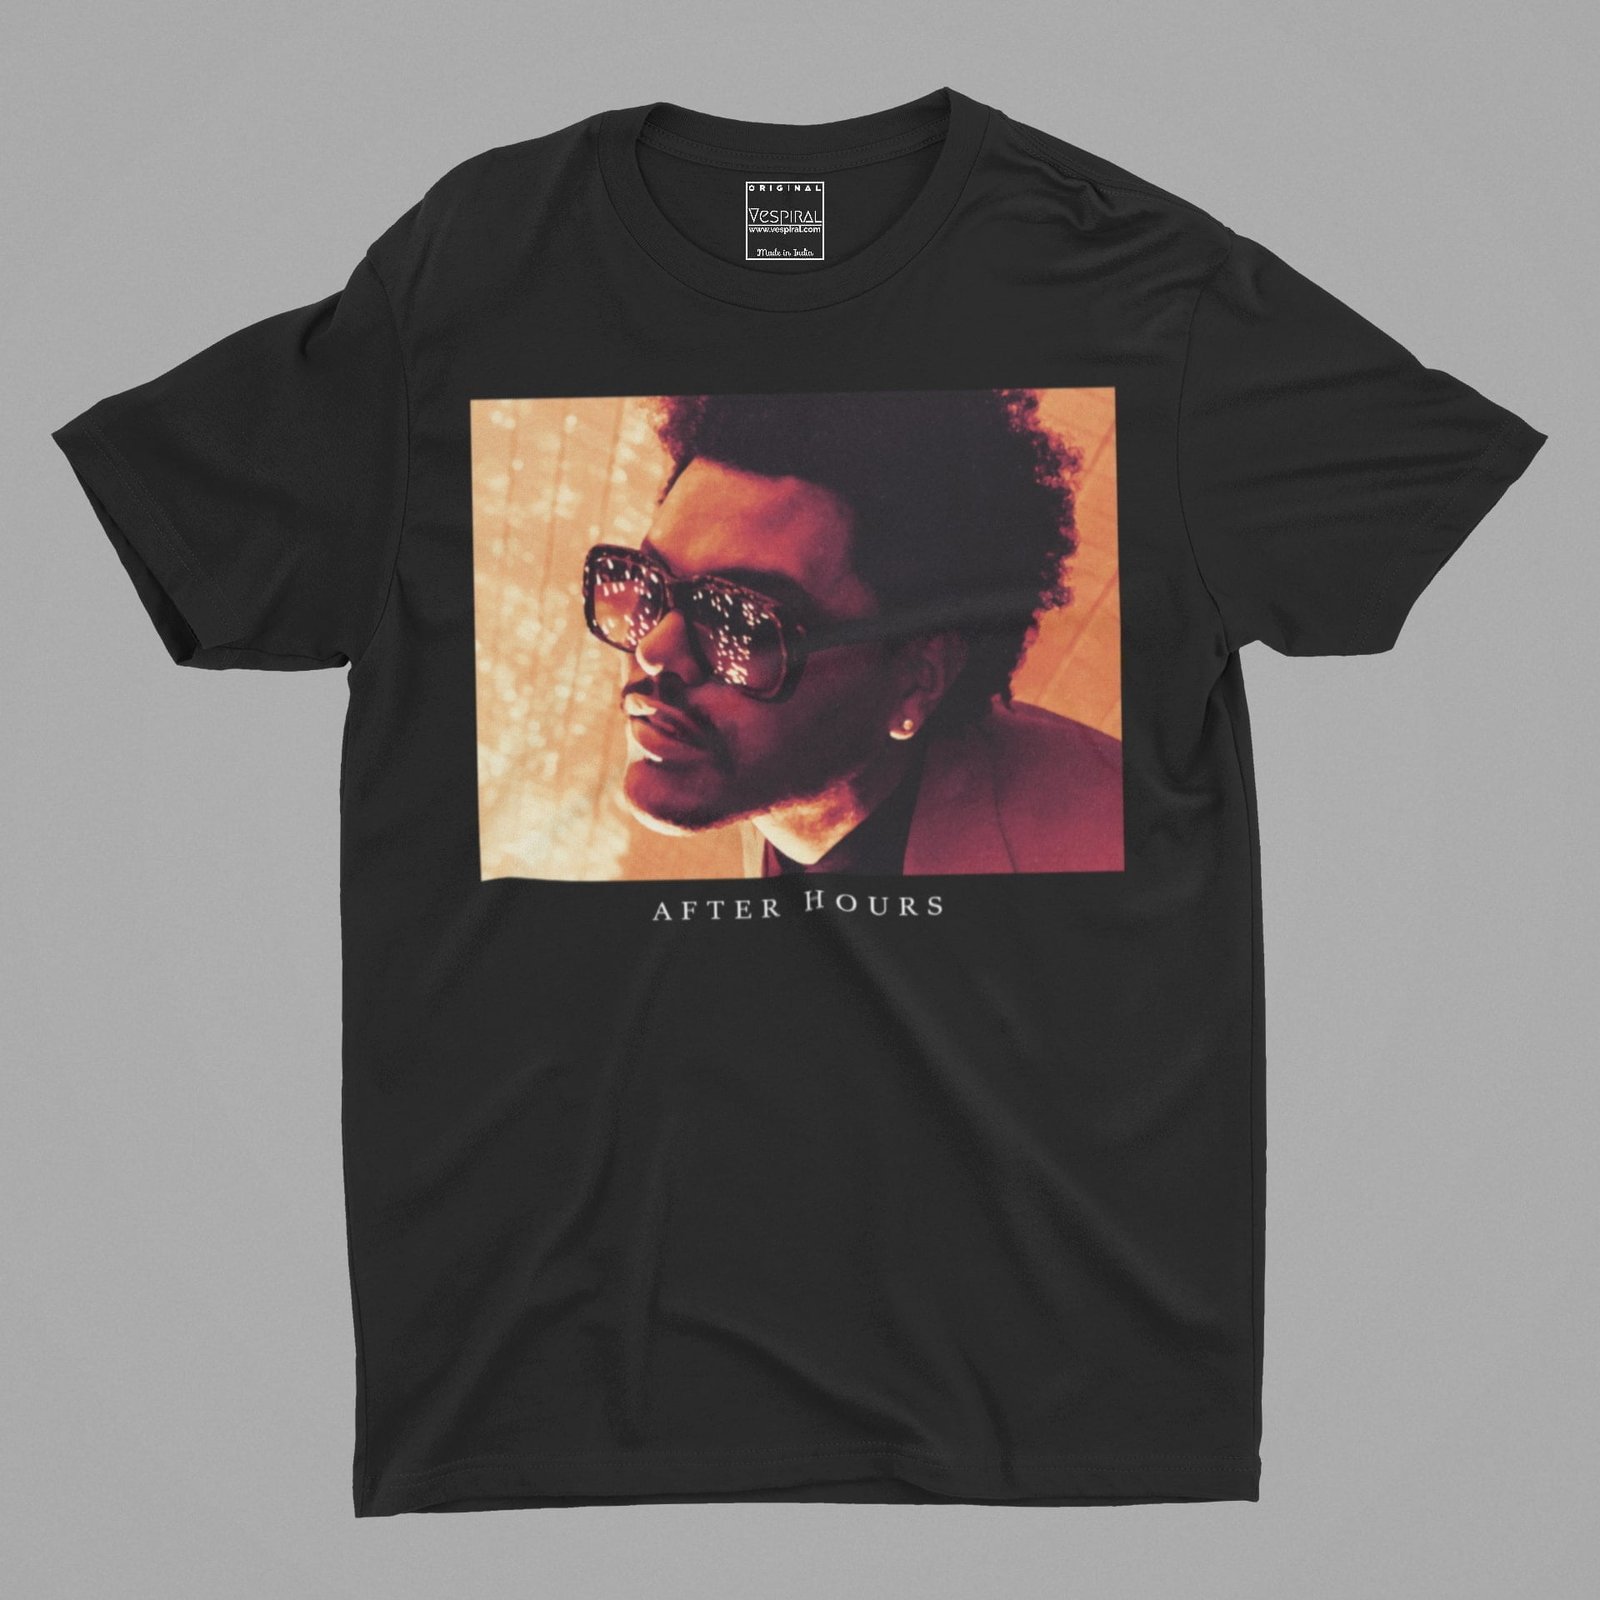 After Hours The Weeknd T Shirt Vespiral 